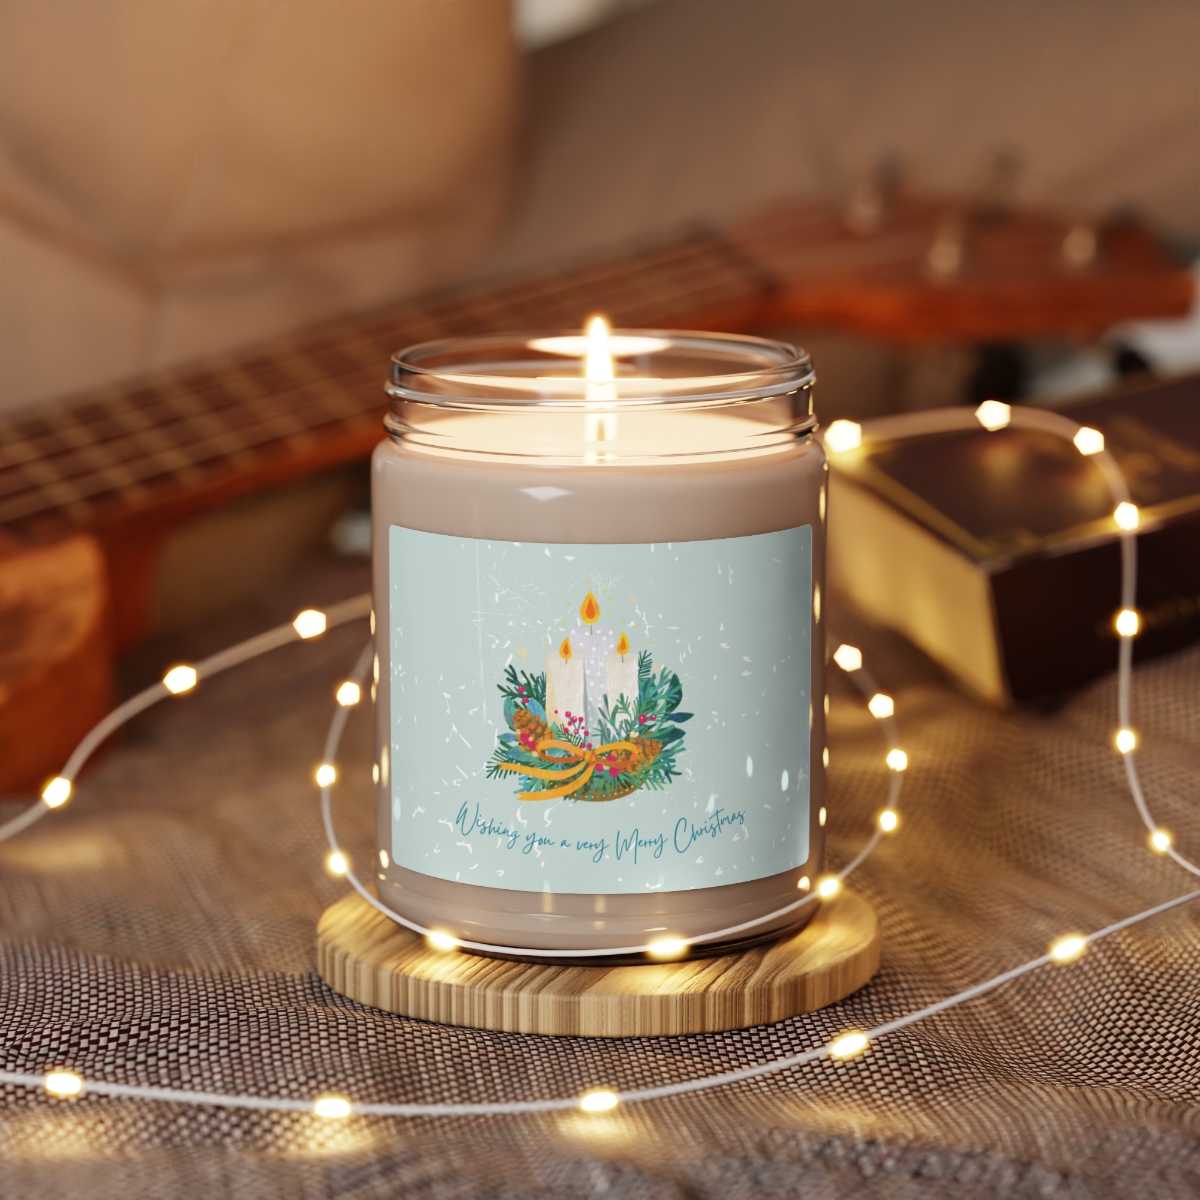 "wishing you a very merry christmas" scented soy candle, 9oz